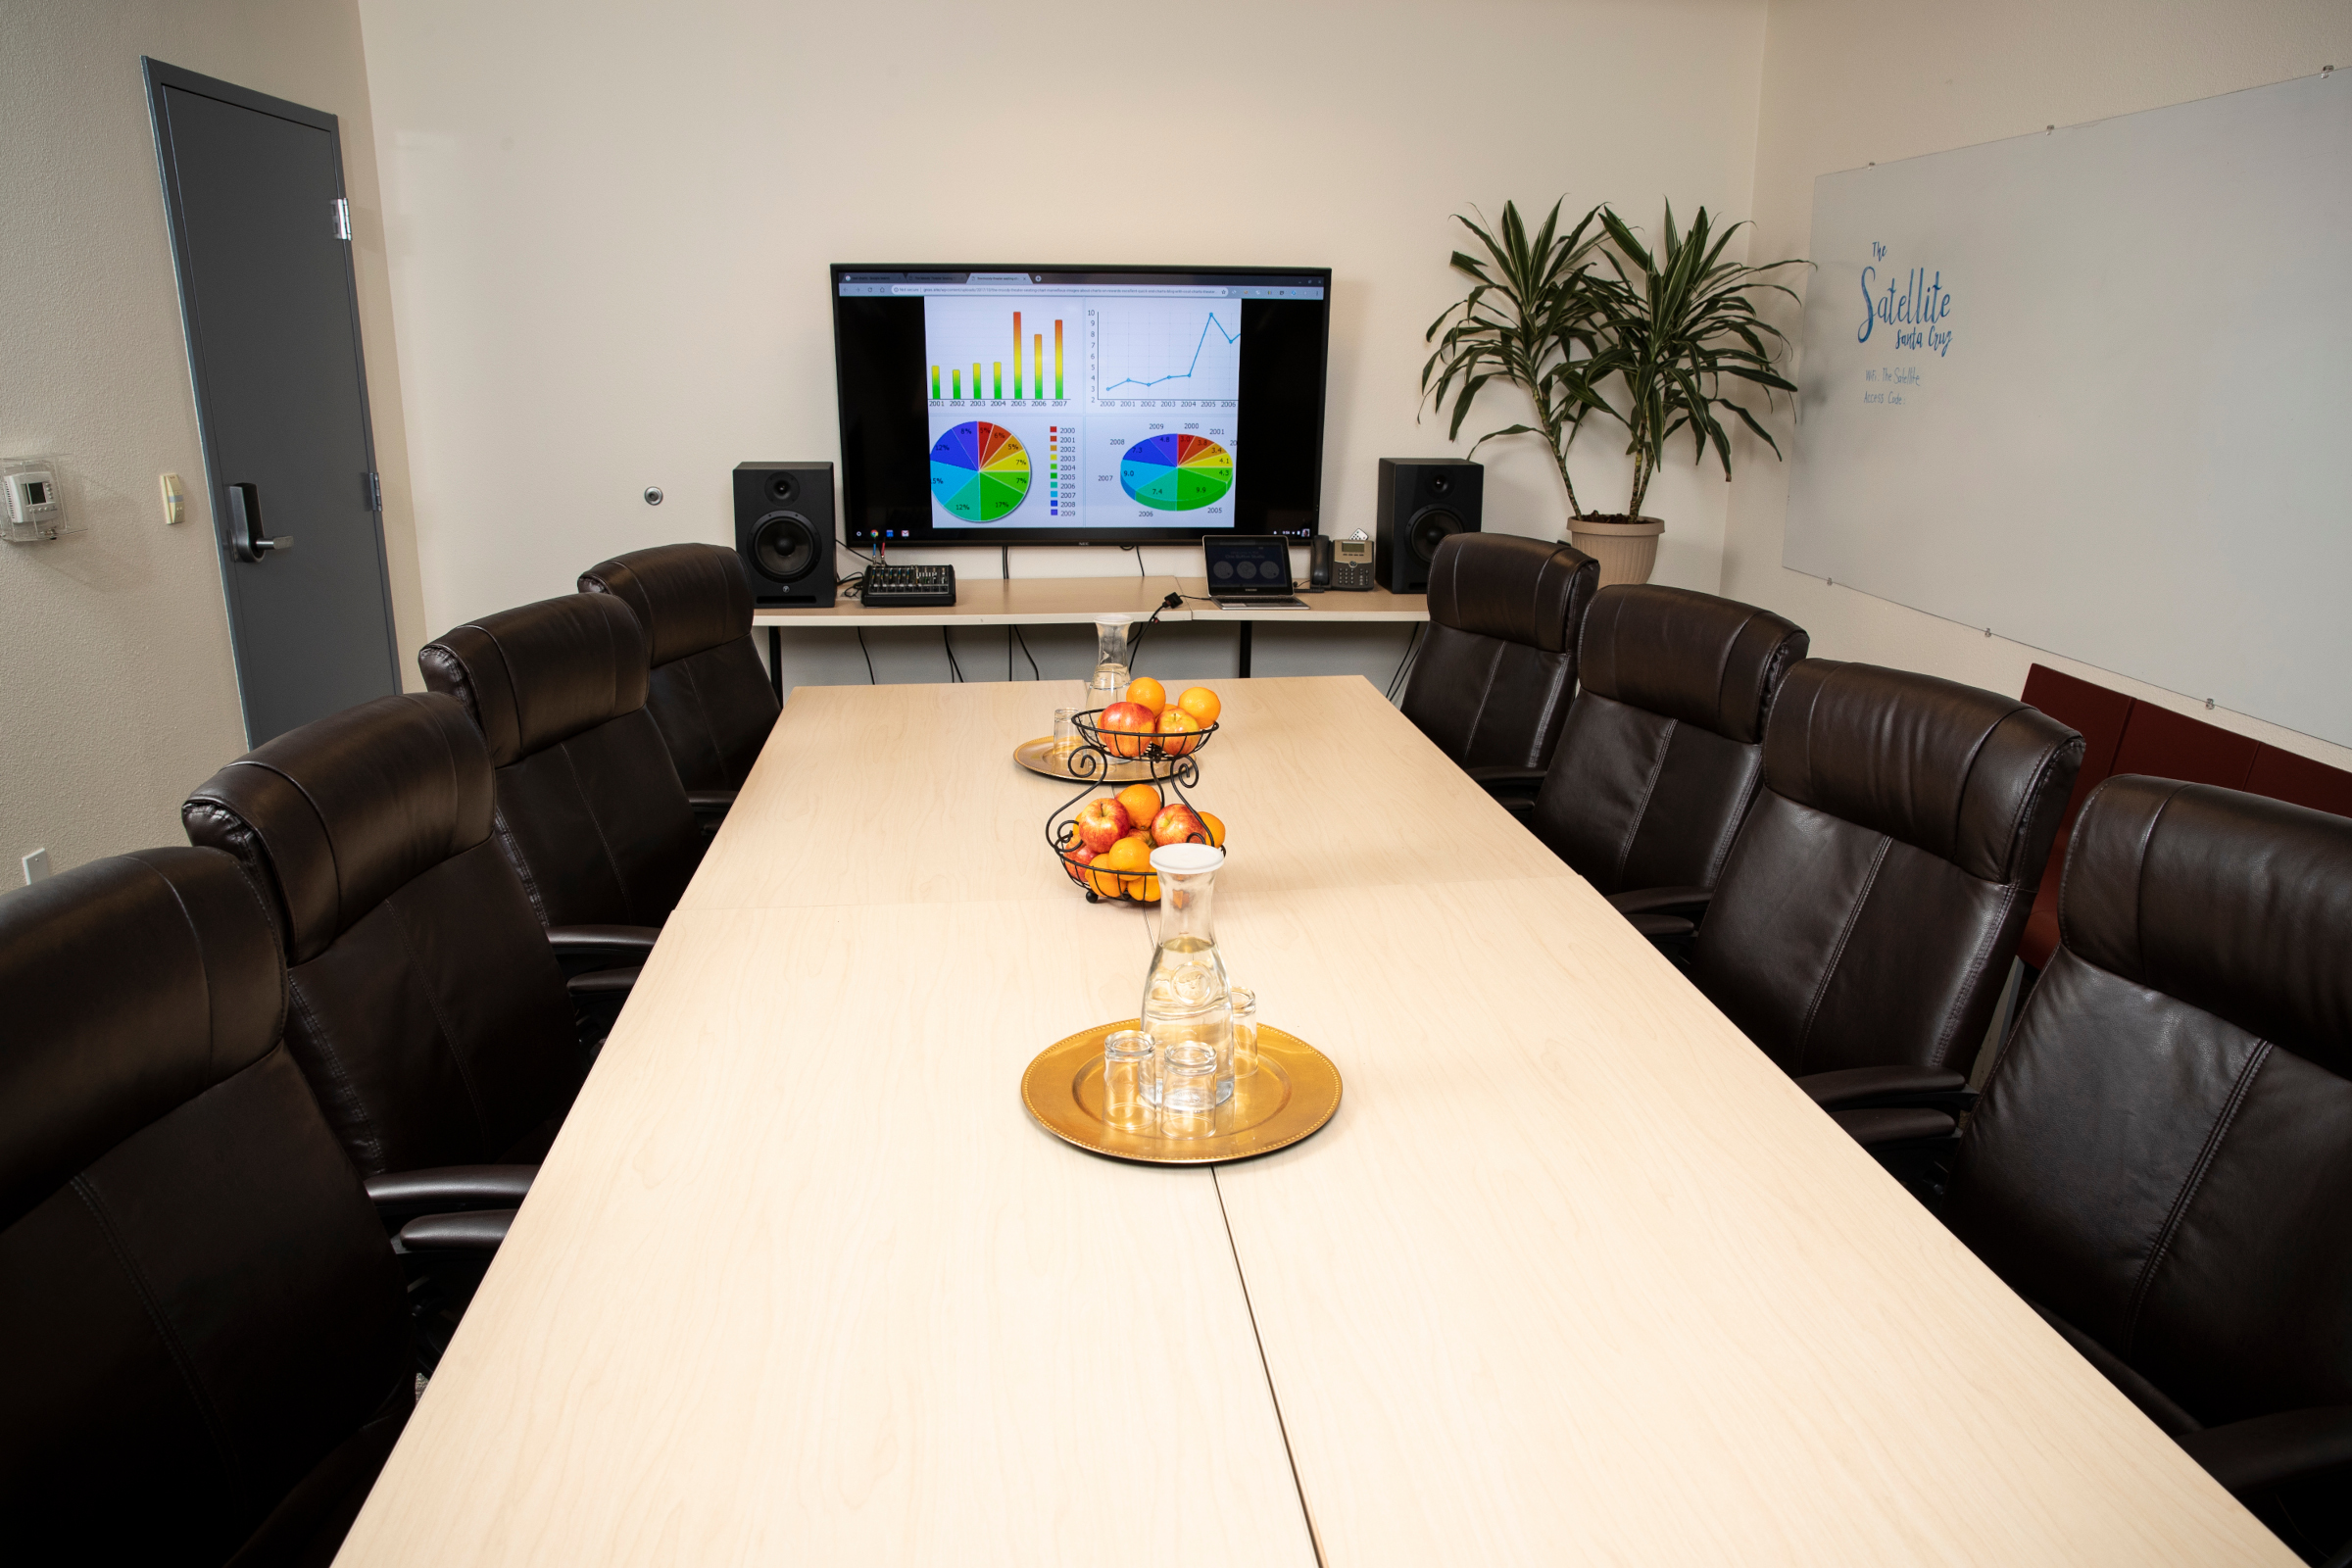 The Satelite Conference Room